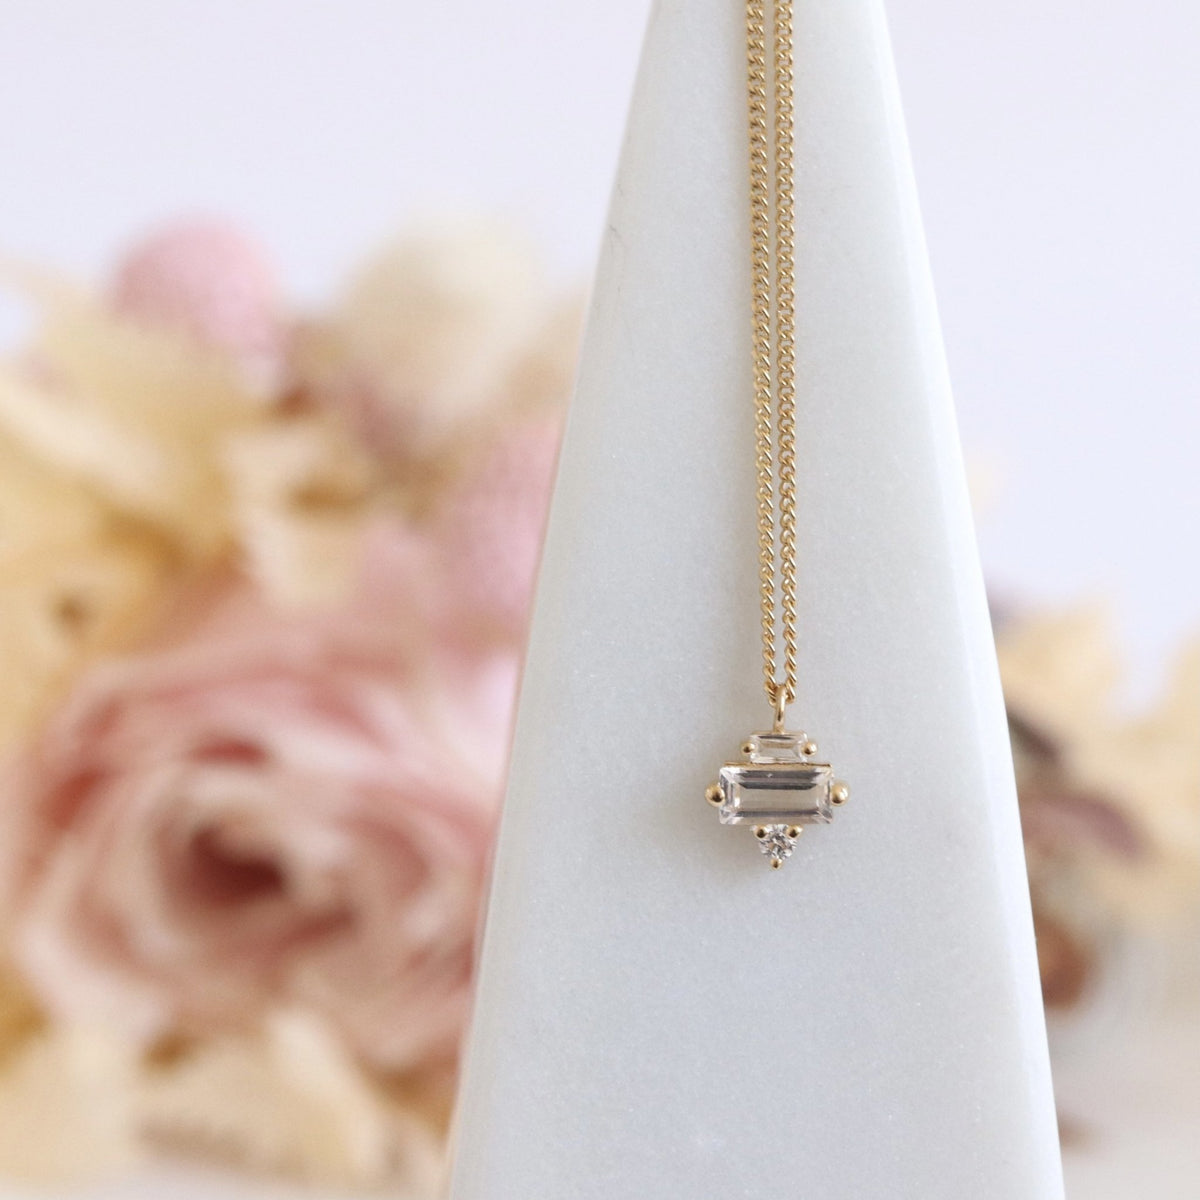 Tiny Loyal Prism Necklace - White Topaz, Cubic Zirconia &amp; Gold - SO PRETTY CARA COTTER